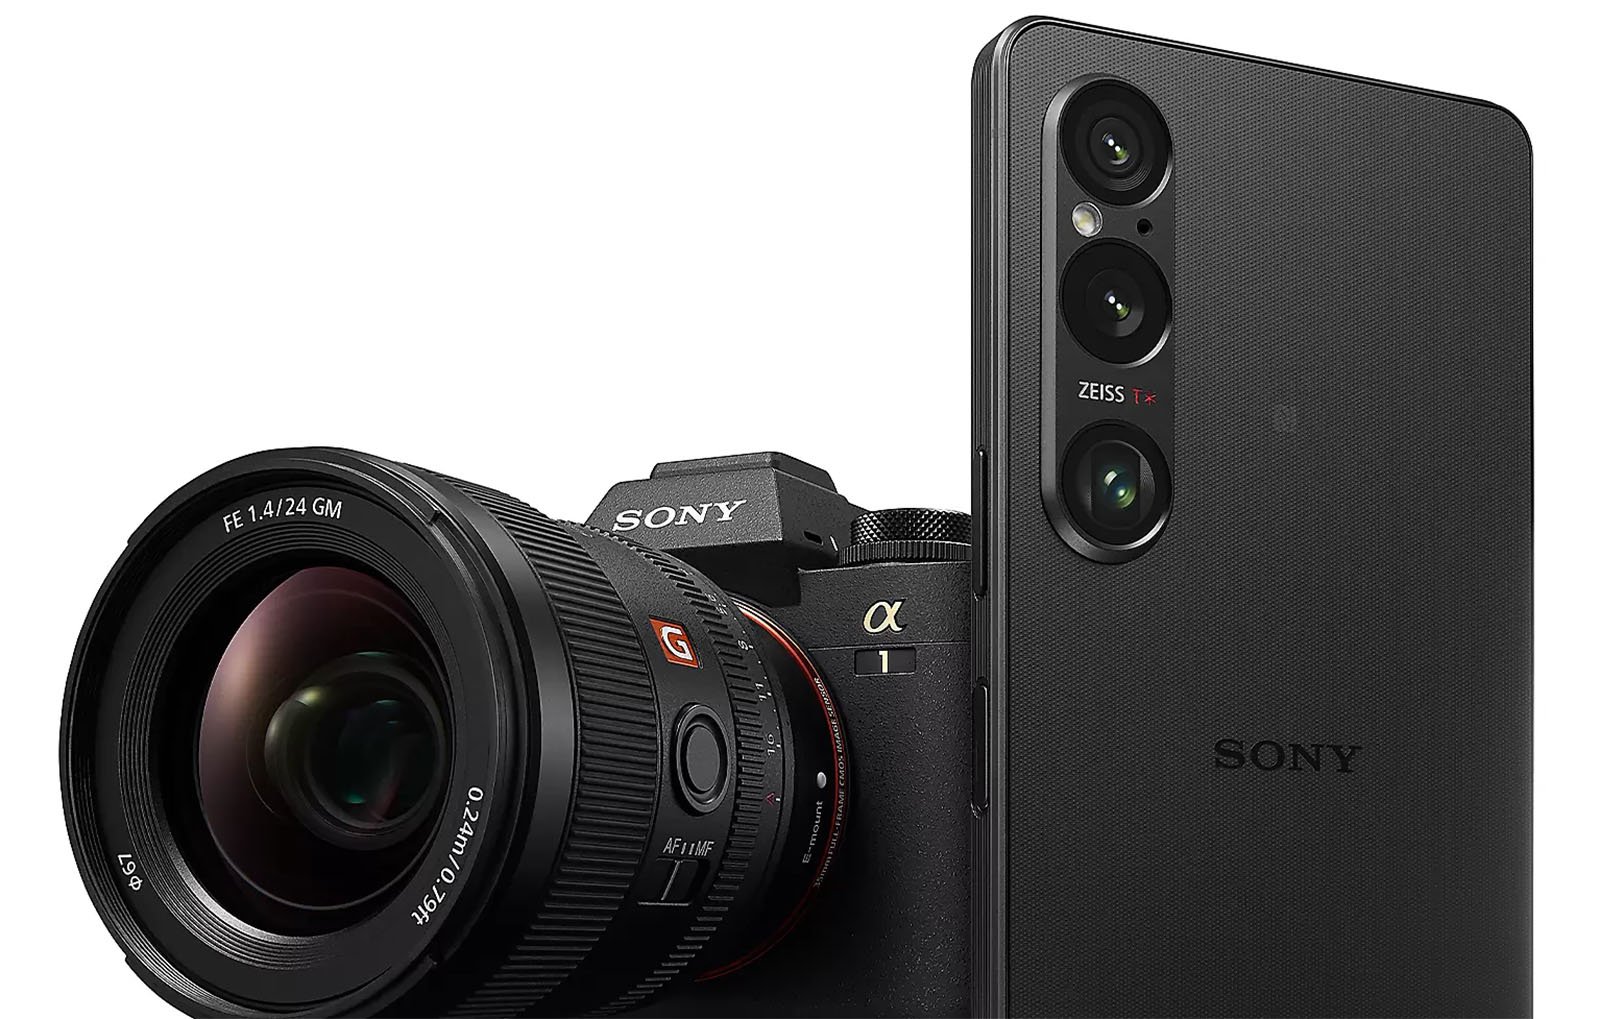 A close-up image showcasing a Sony Alpha camera with a wide-angle lens alongside a black smartphone featuring a triple-lens camera system. The camera lens displays "FE 1.4/24 GM" and the smartphone has "ZEISS T*" branding near the lens.